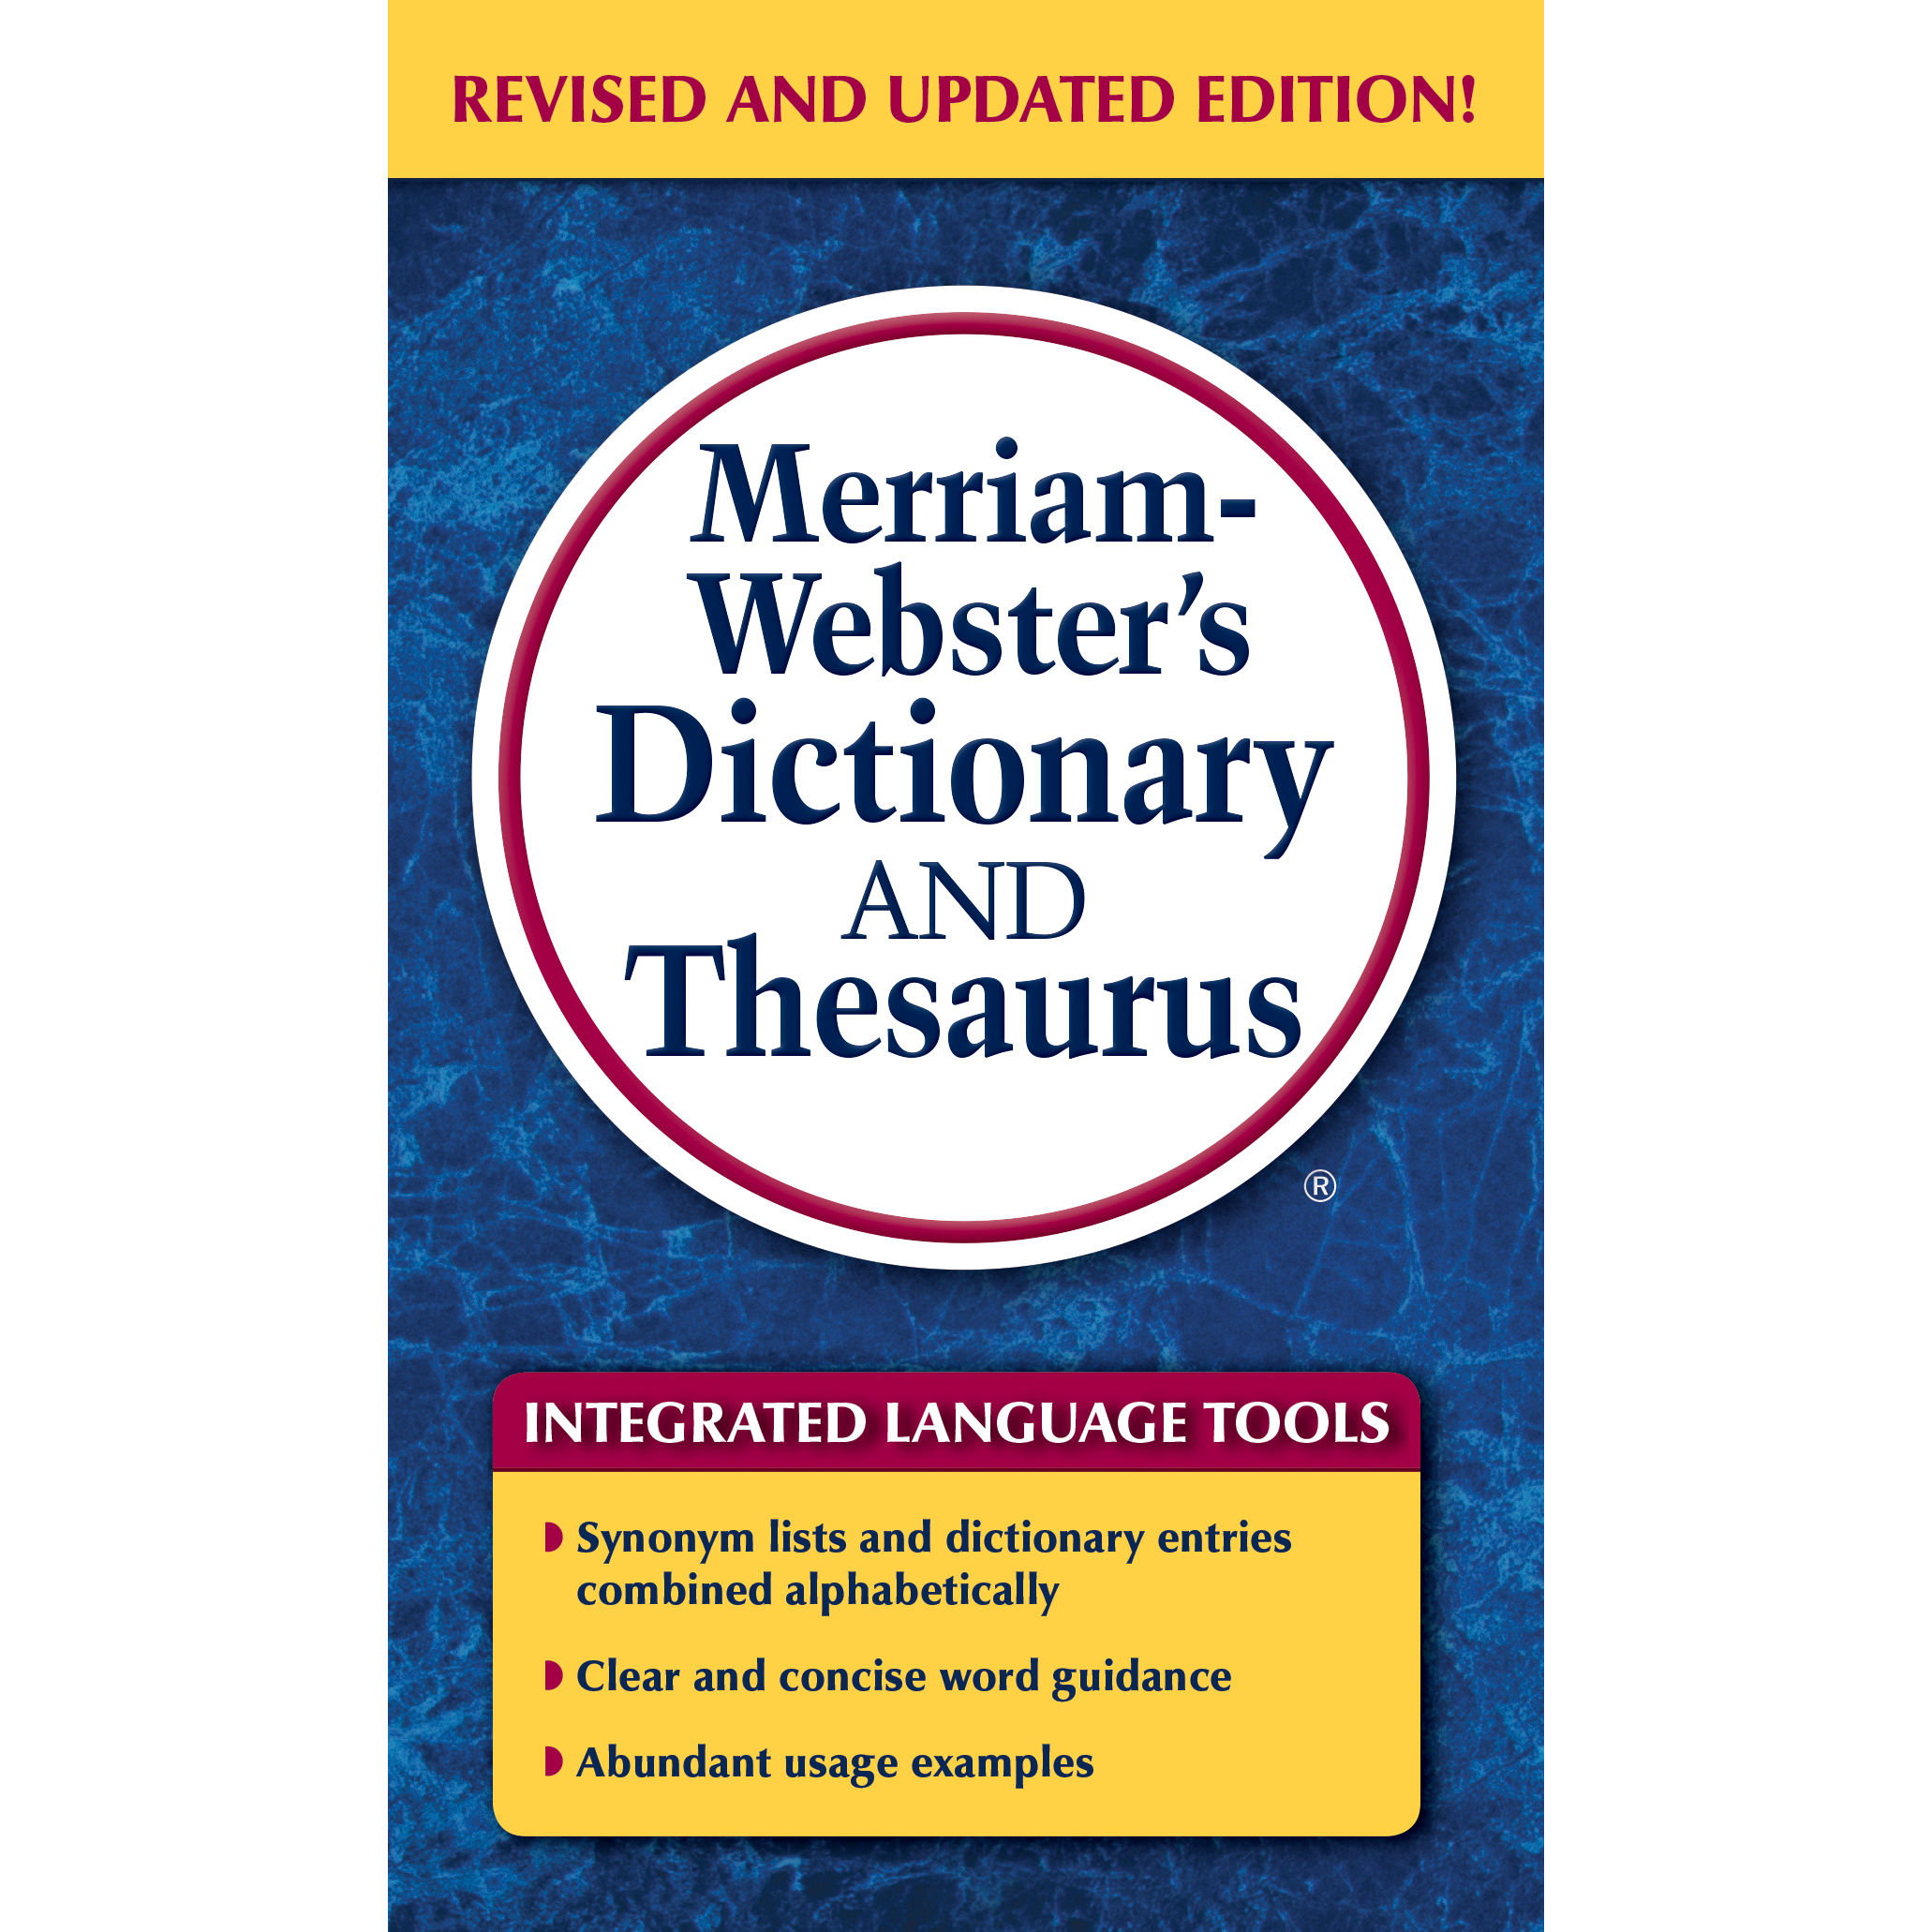 Dictionary entries and citations